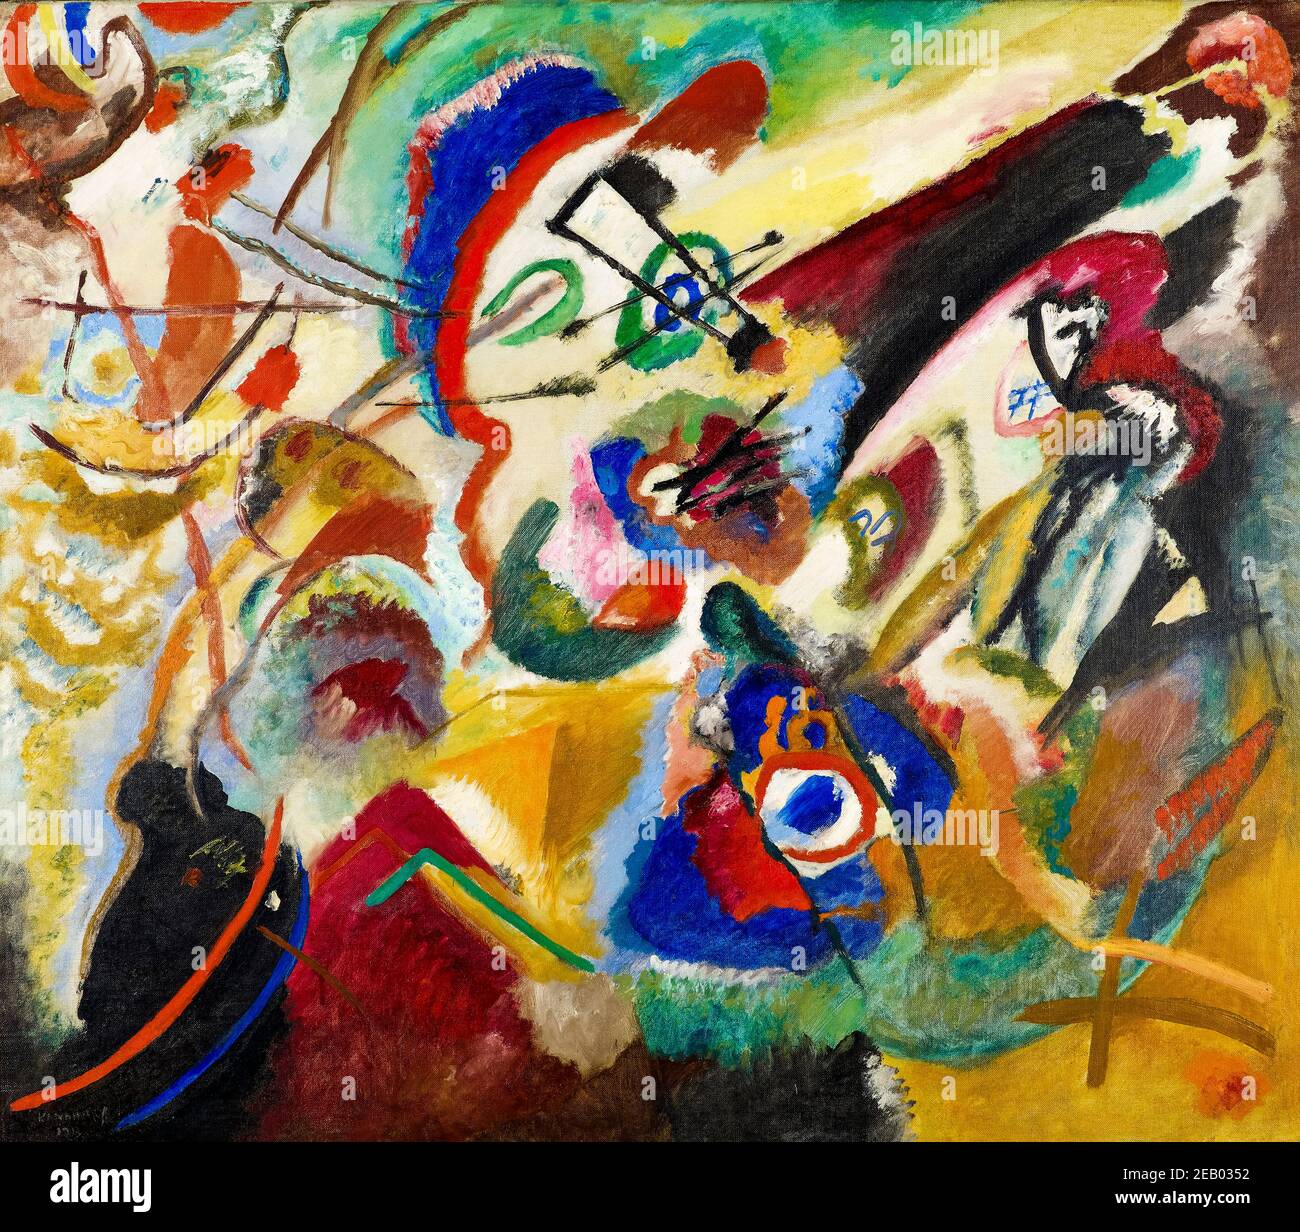 Wassily Kandinsky, Fragment 2 for Composition VII, abstract painting, 1913 Stock Photo